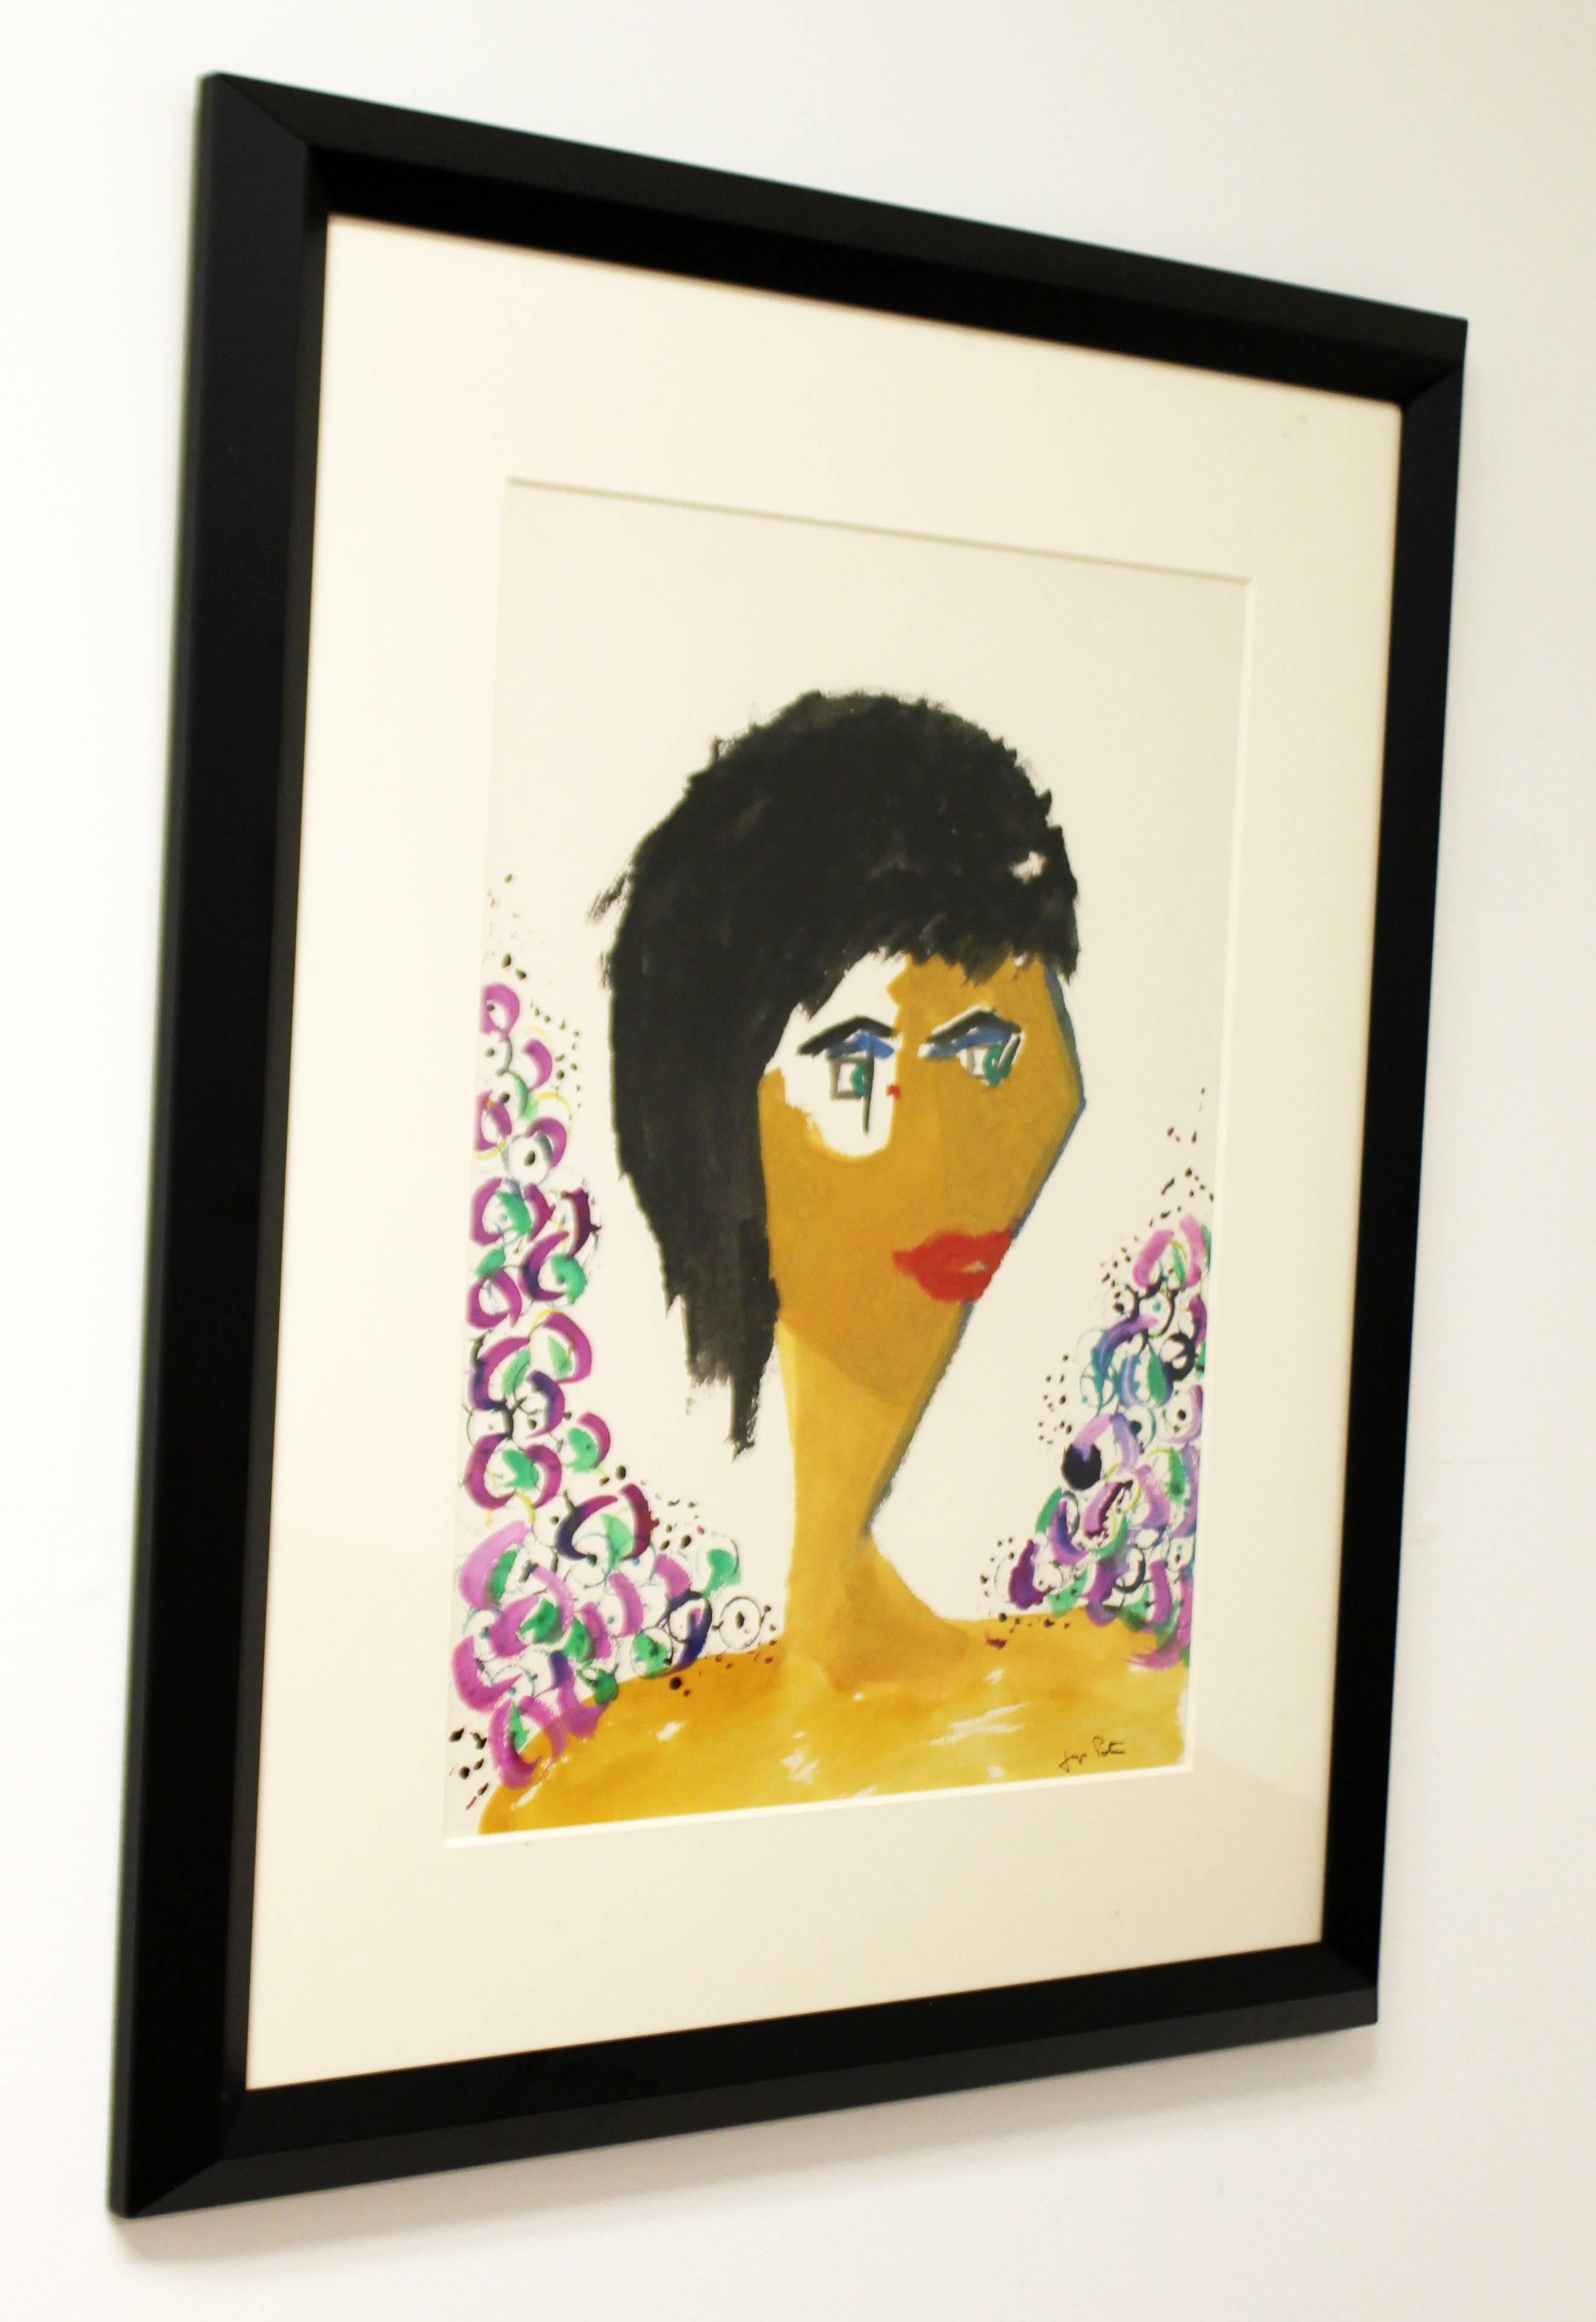 For your consideration is an original watercolor painting of a woman by Jacques Potin, signed. In excellent condition. The dimensions are 29.5